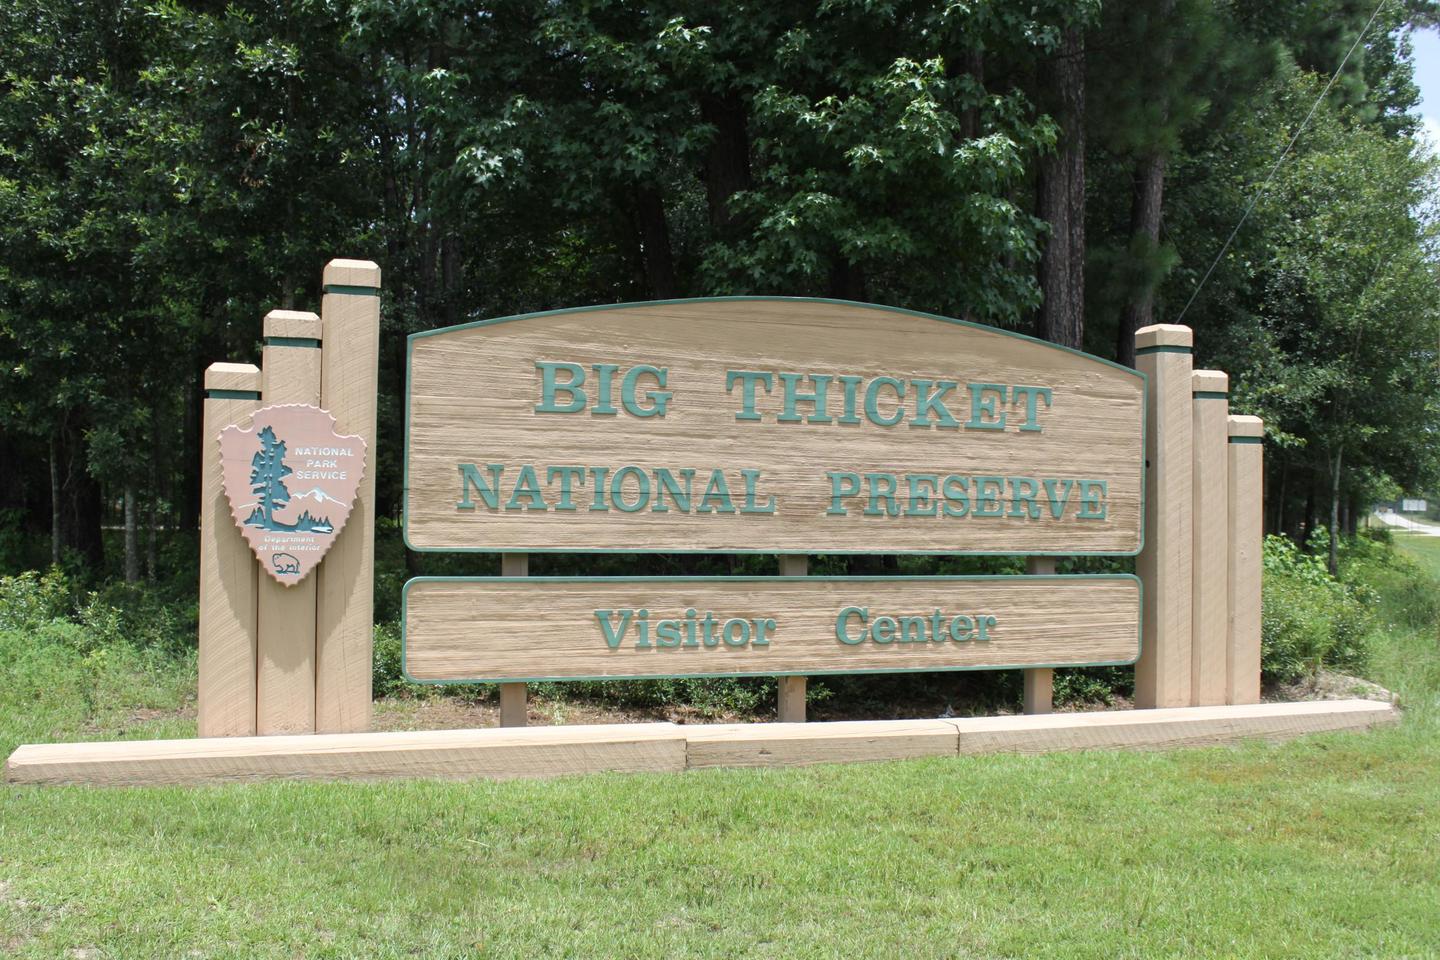 Big Thicket Visitor Center SignBig Thicket National Preserve Visitor Center Sign